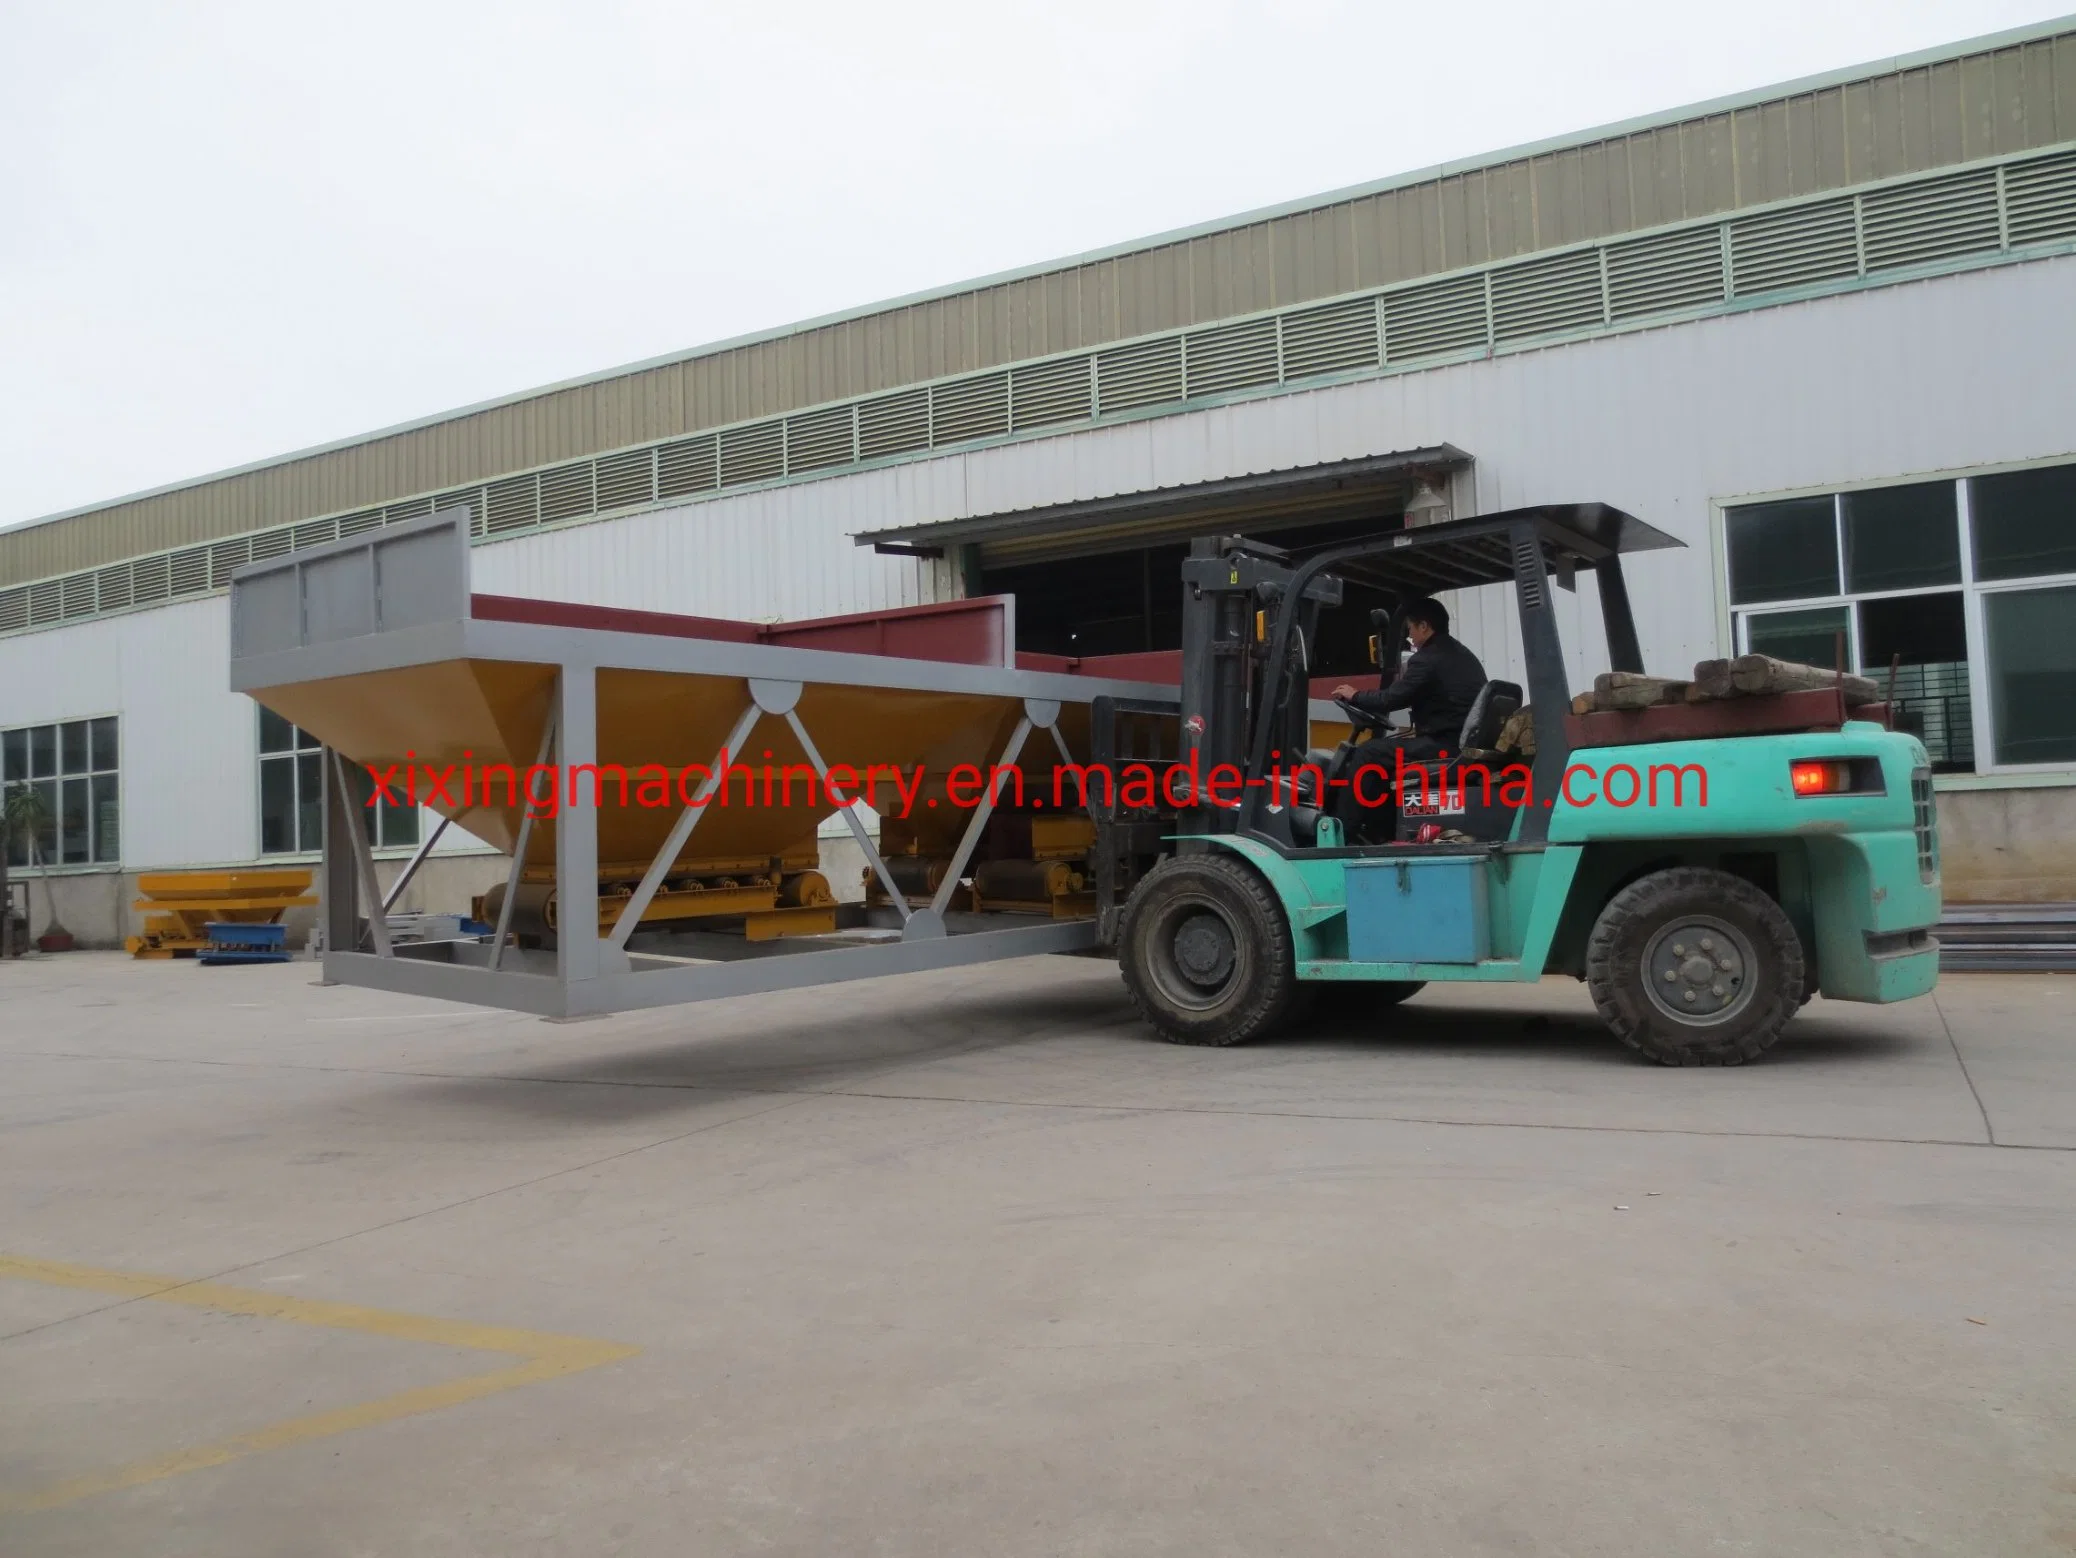 Concrete Batching Plant Construction Machinery Engineering